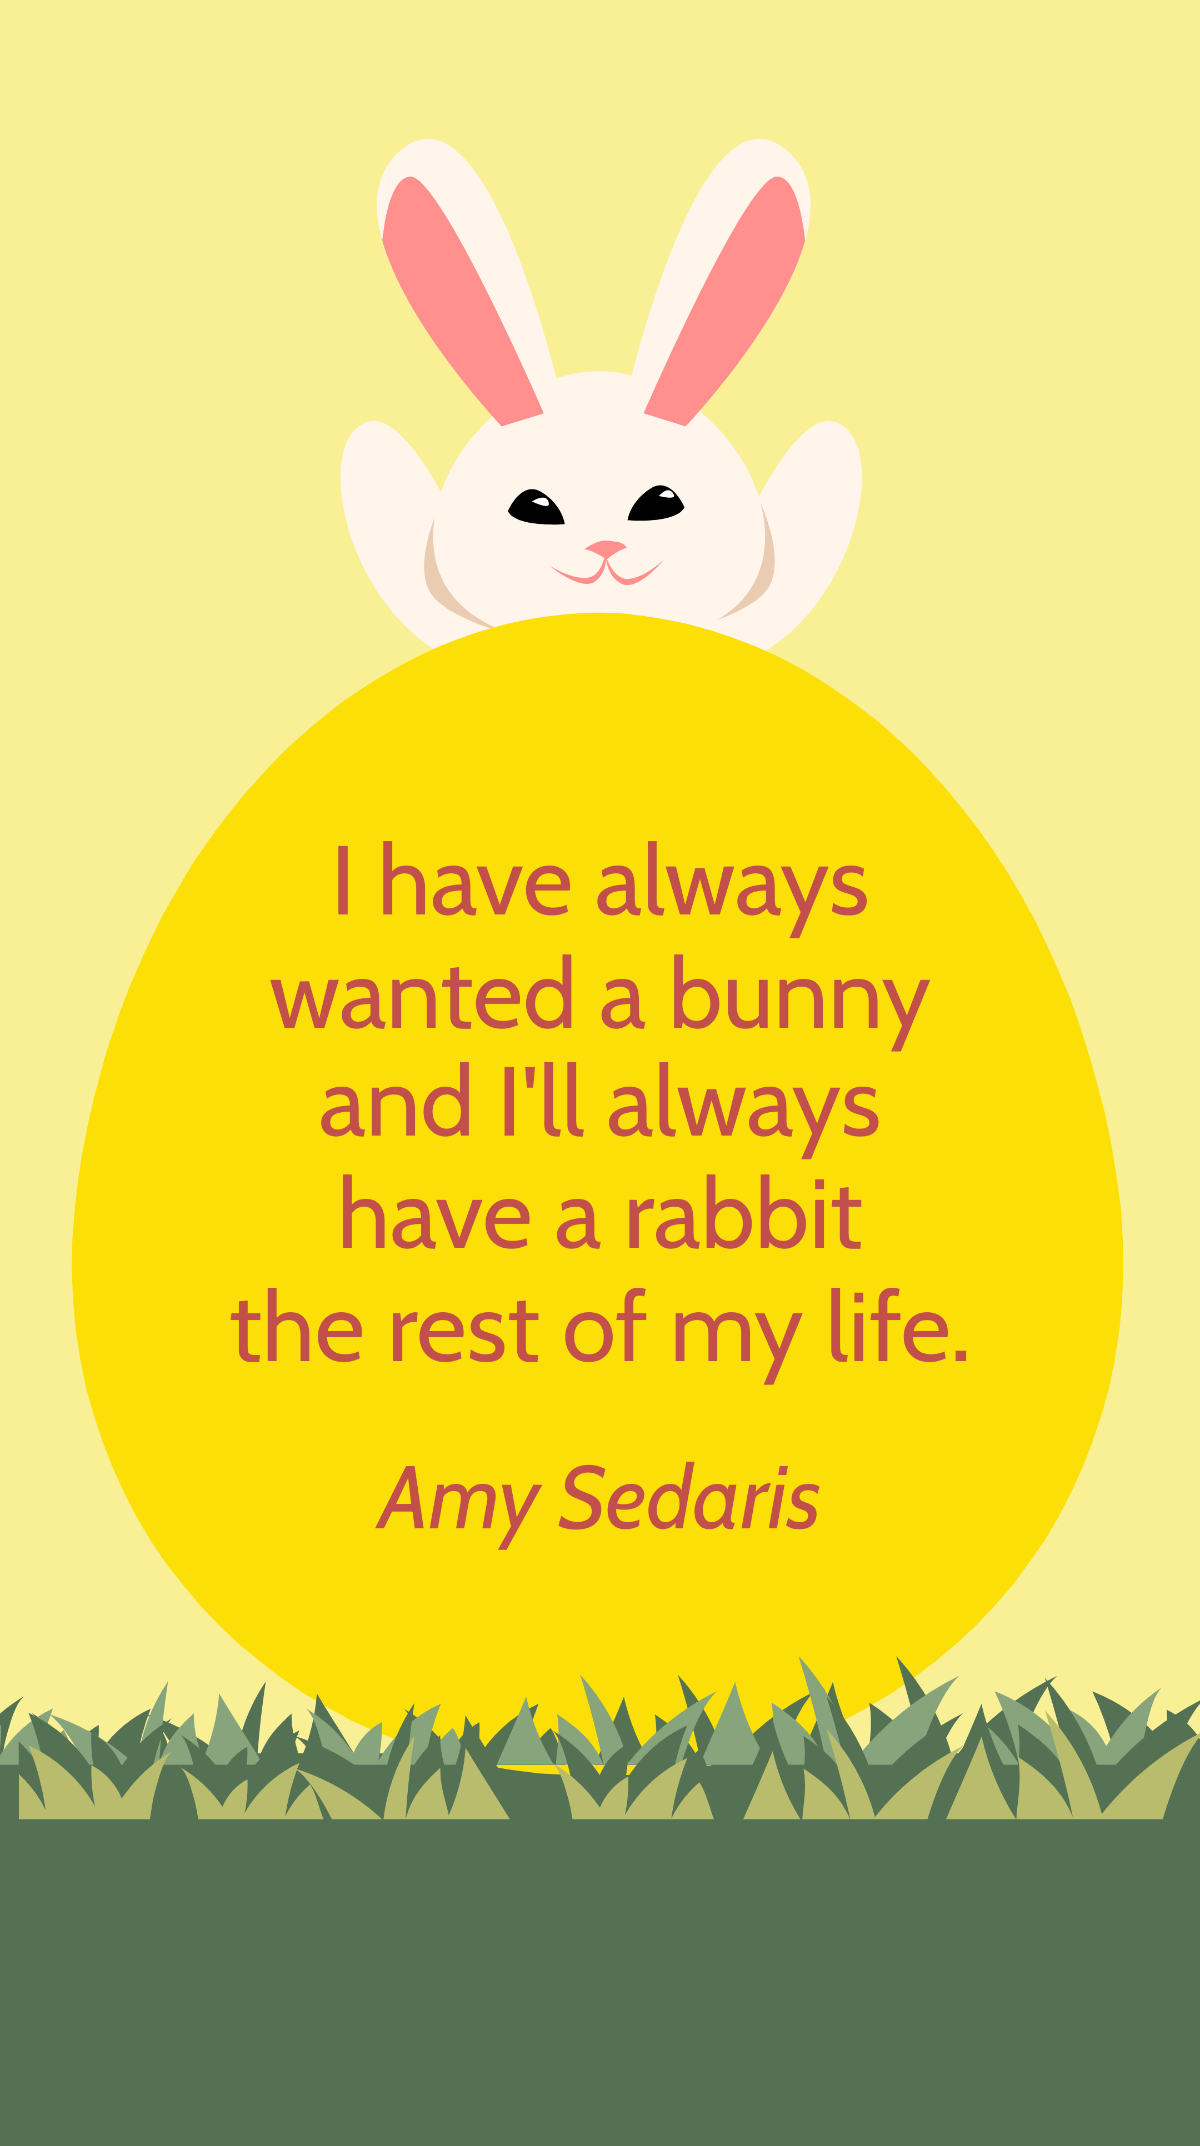 Amy Sedaris - I have always wanted a bunny and I'll always have a rabbit the rest of my life. Template